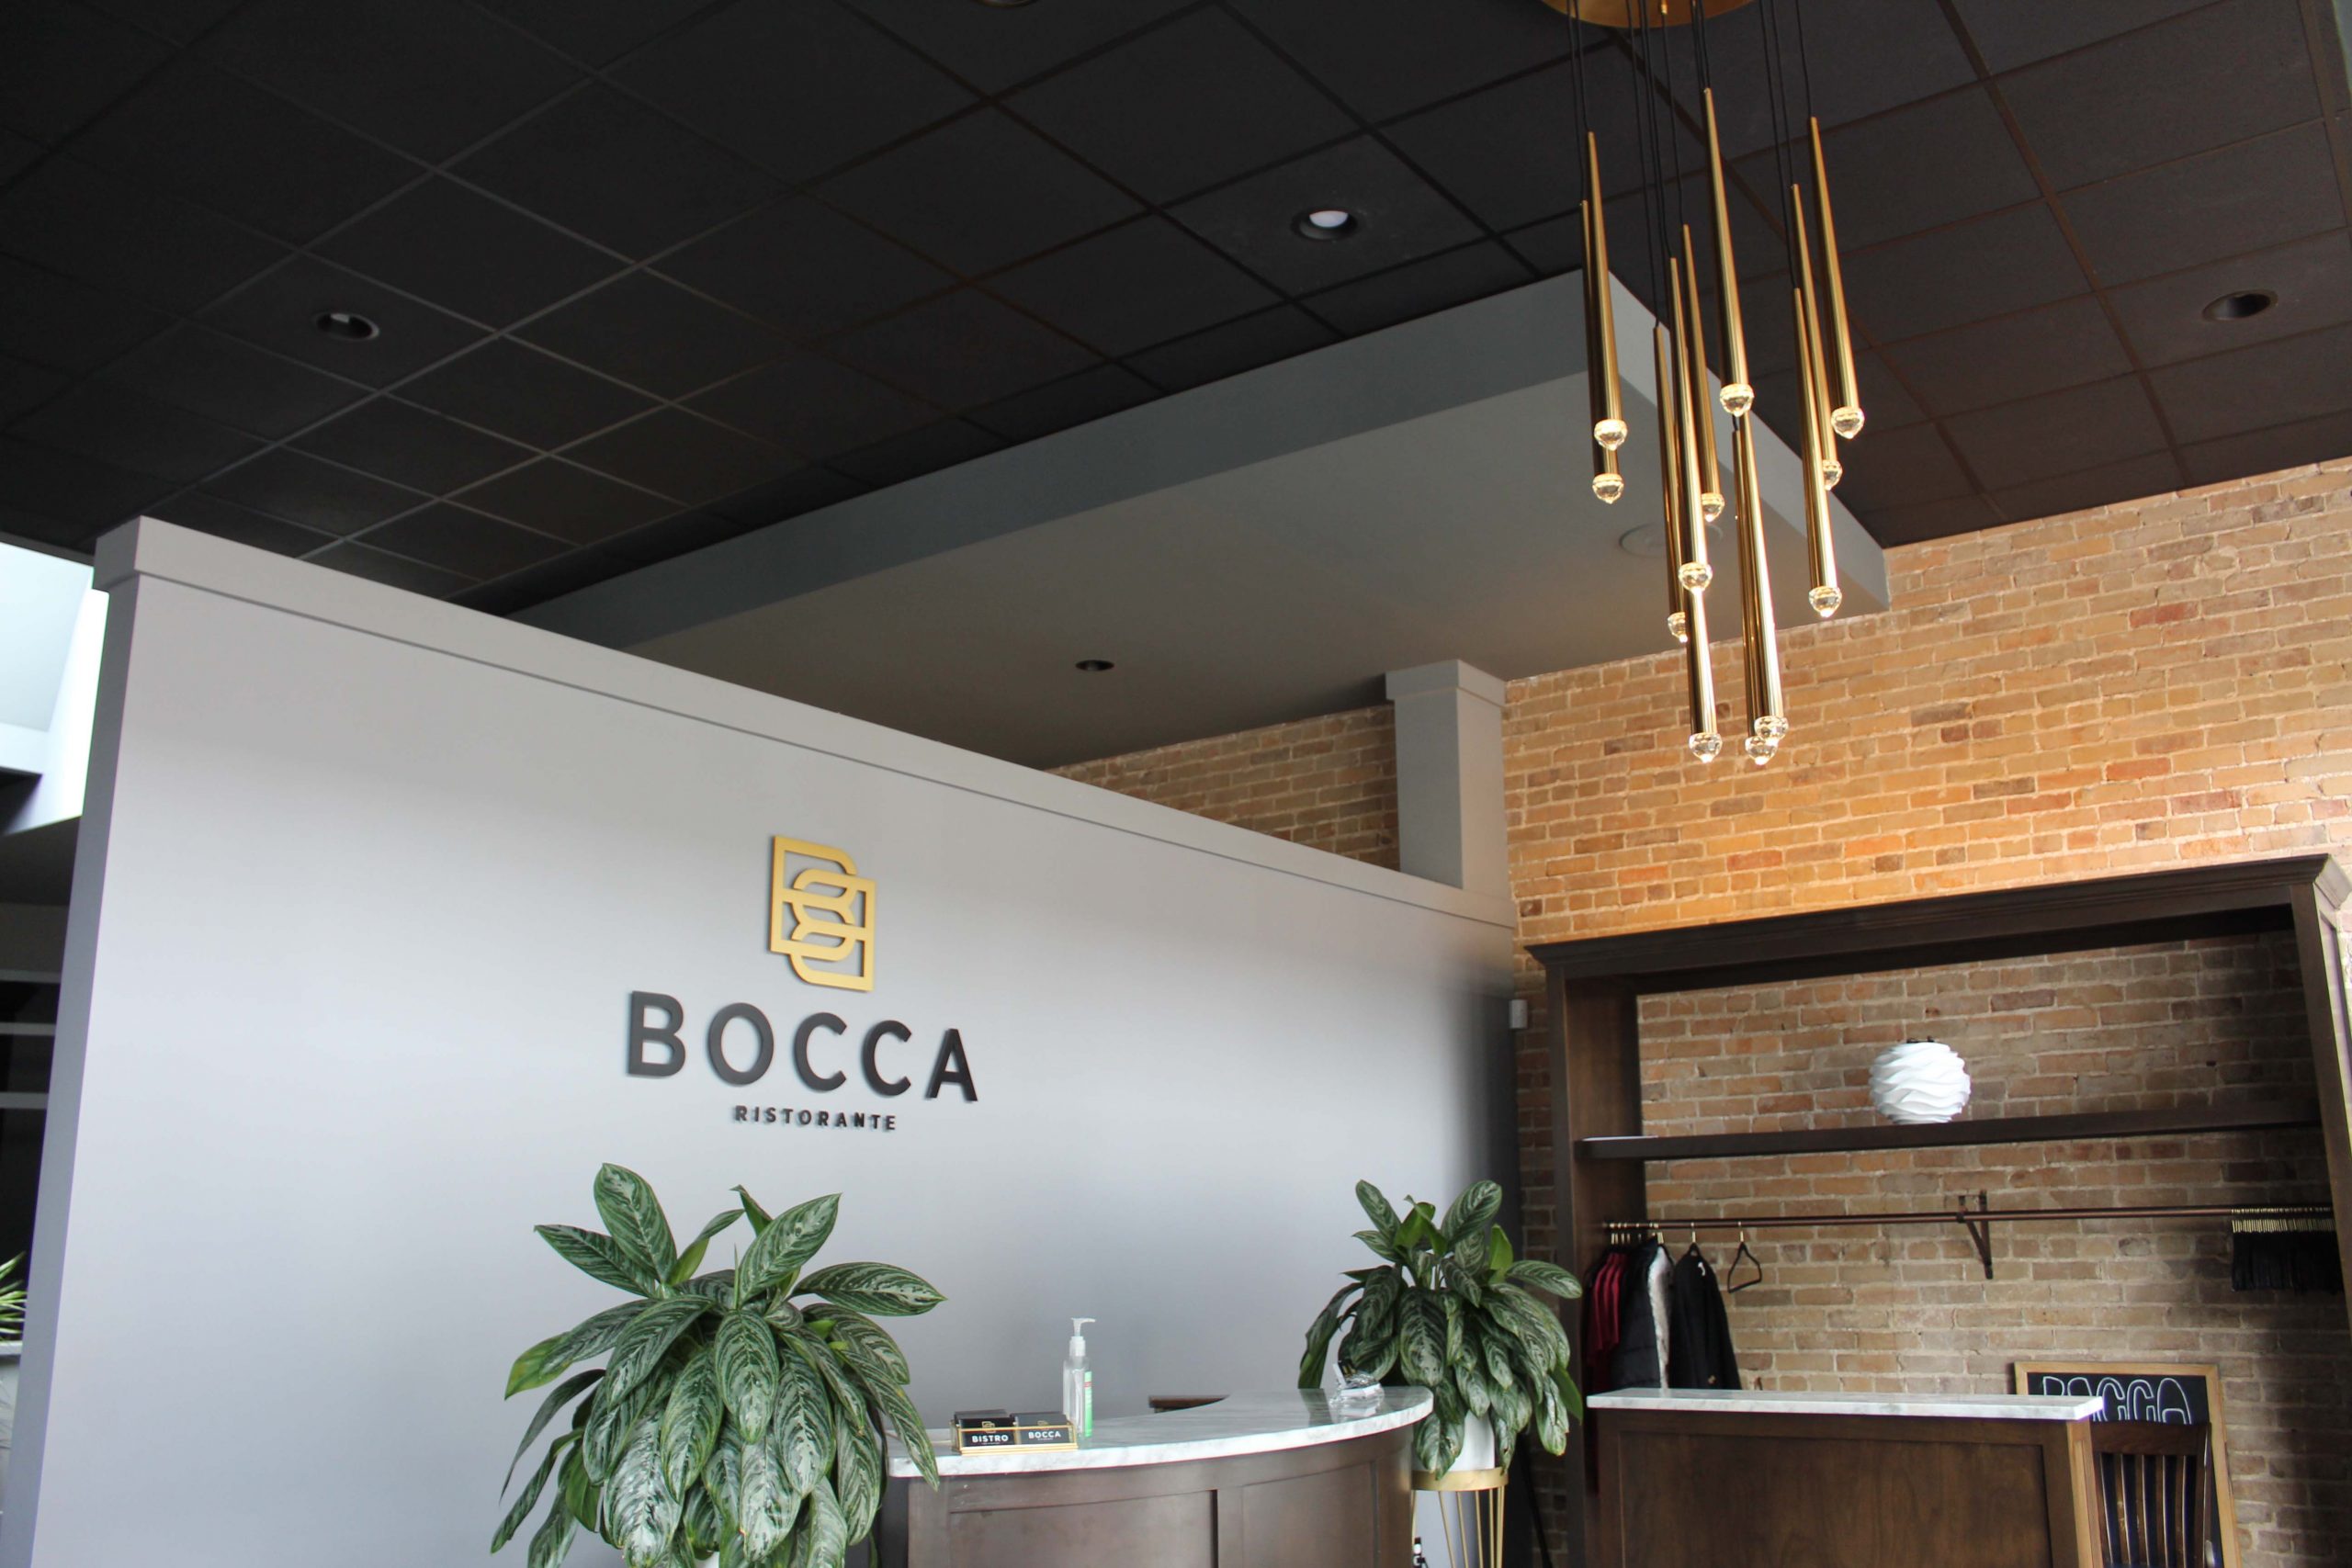 Bocca Ristorante featured in Iron City Ink article, “Eateries hope to attract World Games visitors